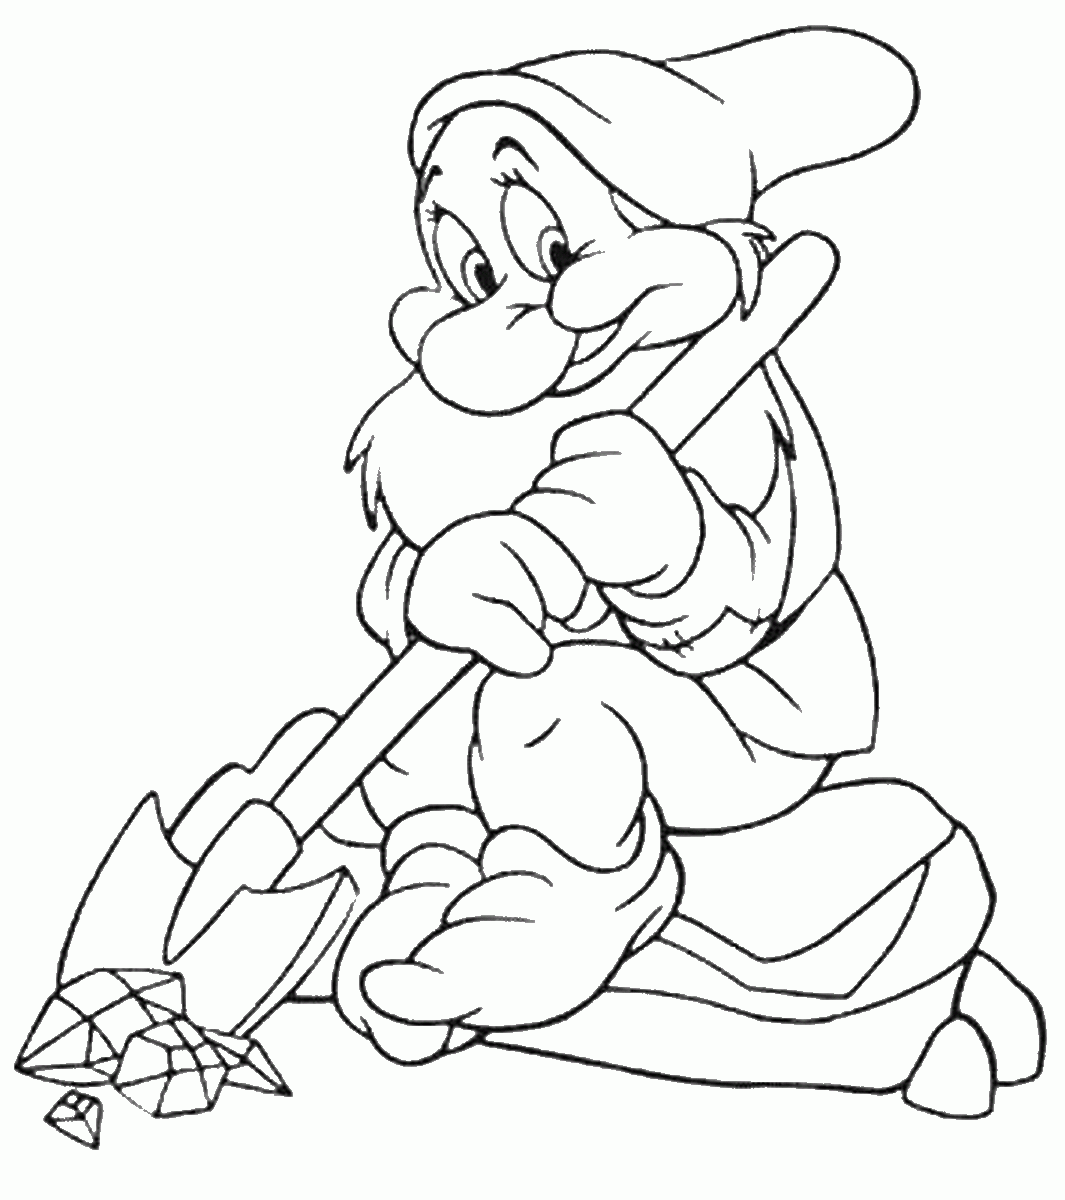 Snow White Coloring Pages Cartoons snow_white_cl_18 Printable 2020 5725 Coloring4free